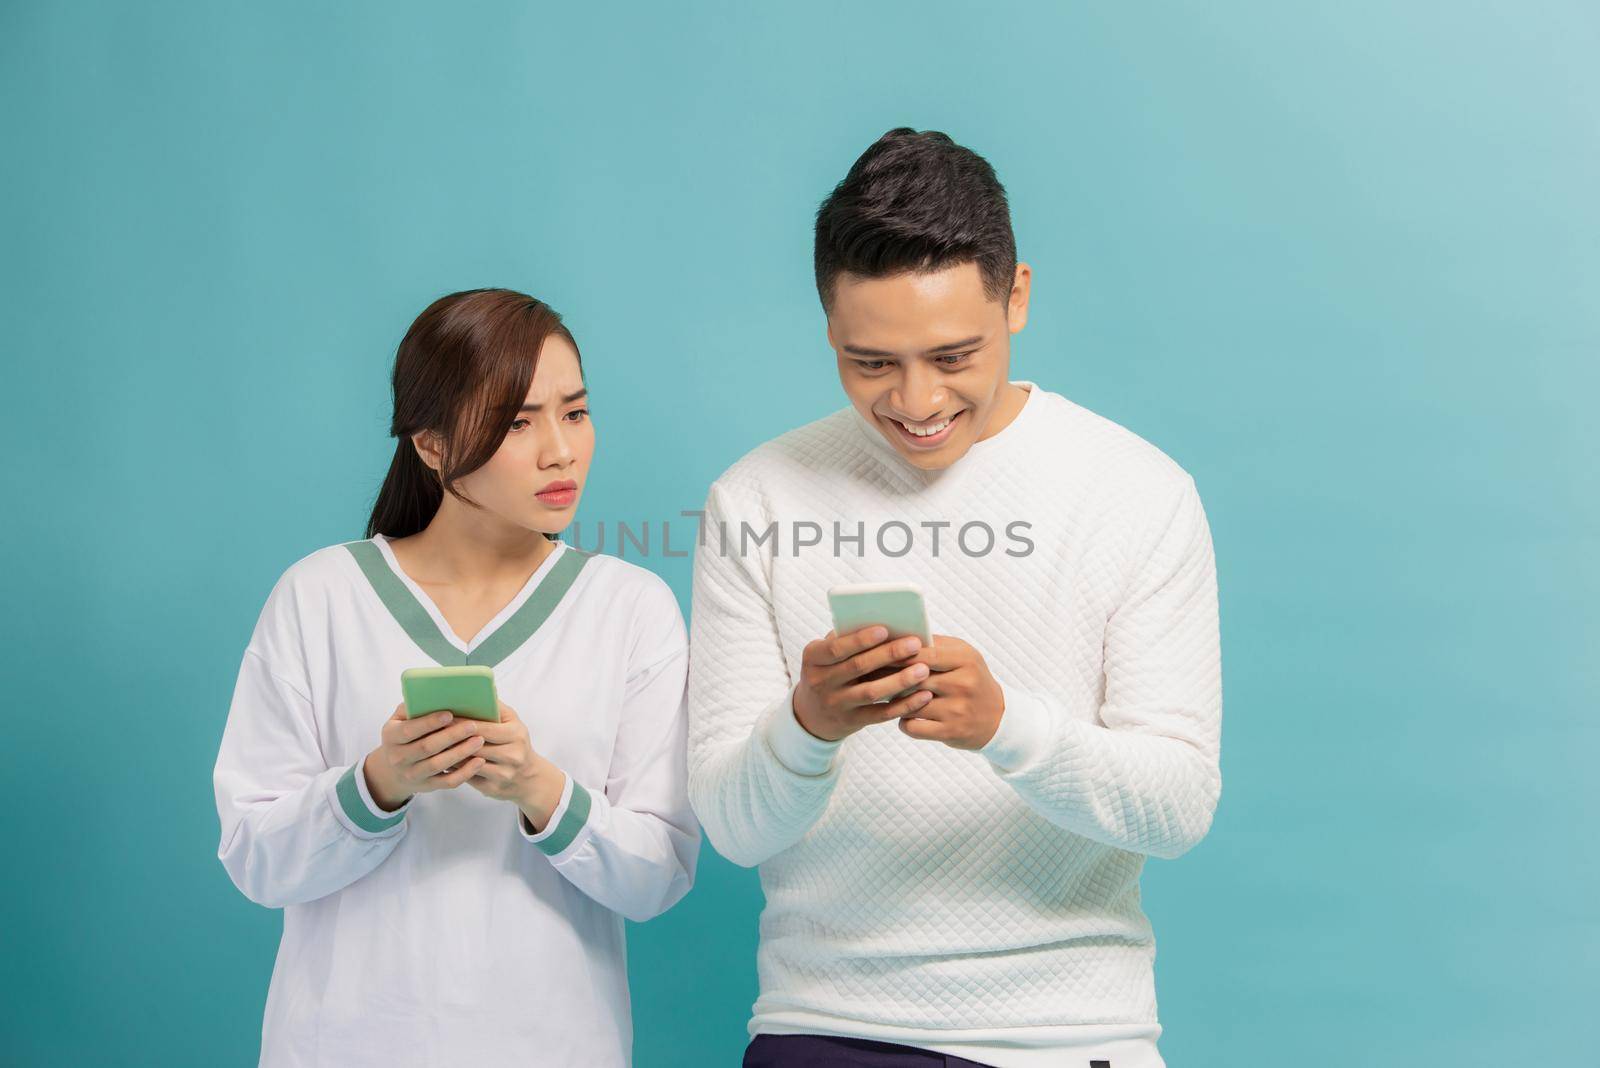 Curious woman spying and peeping at smartphone of his boyfriend while They standing together over light background by makidotvn